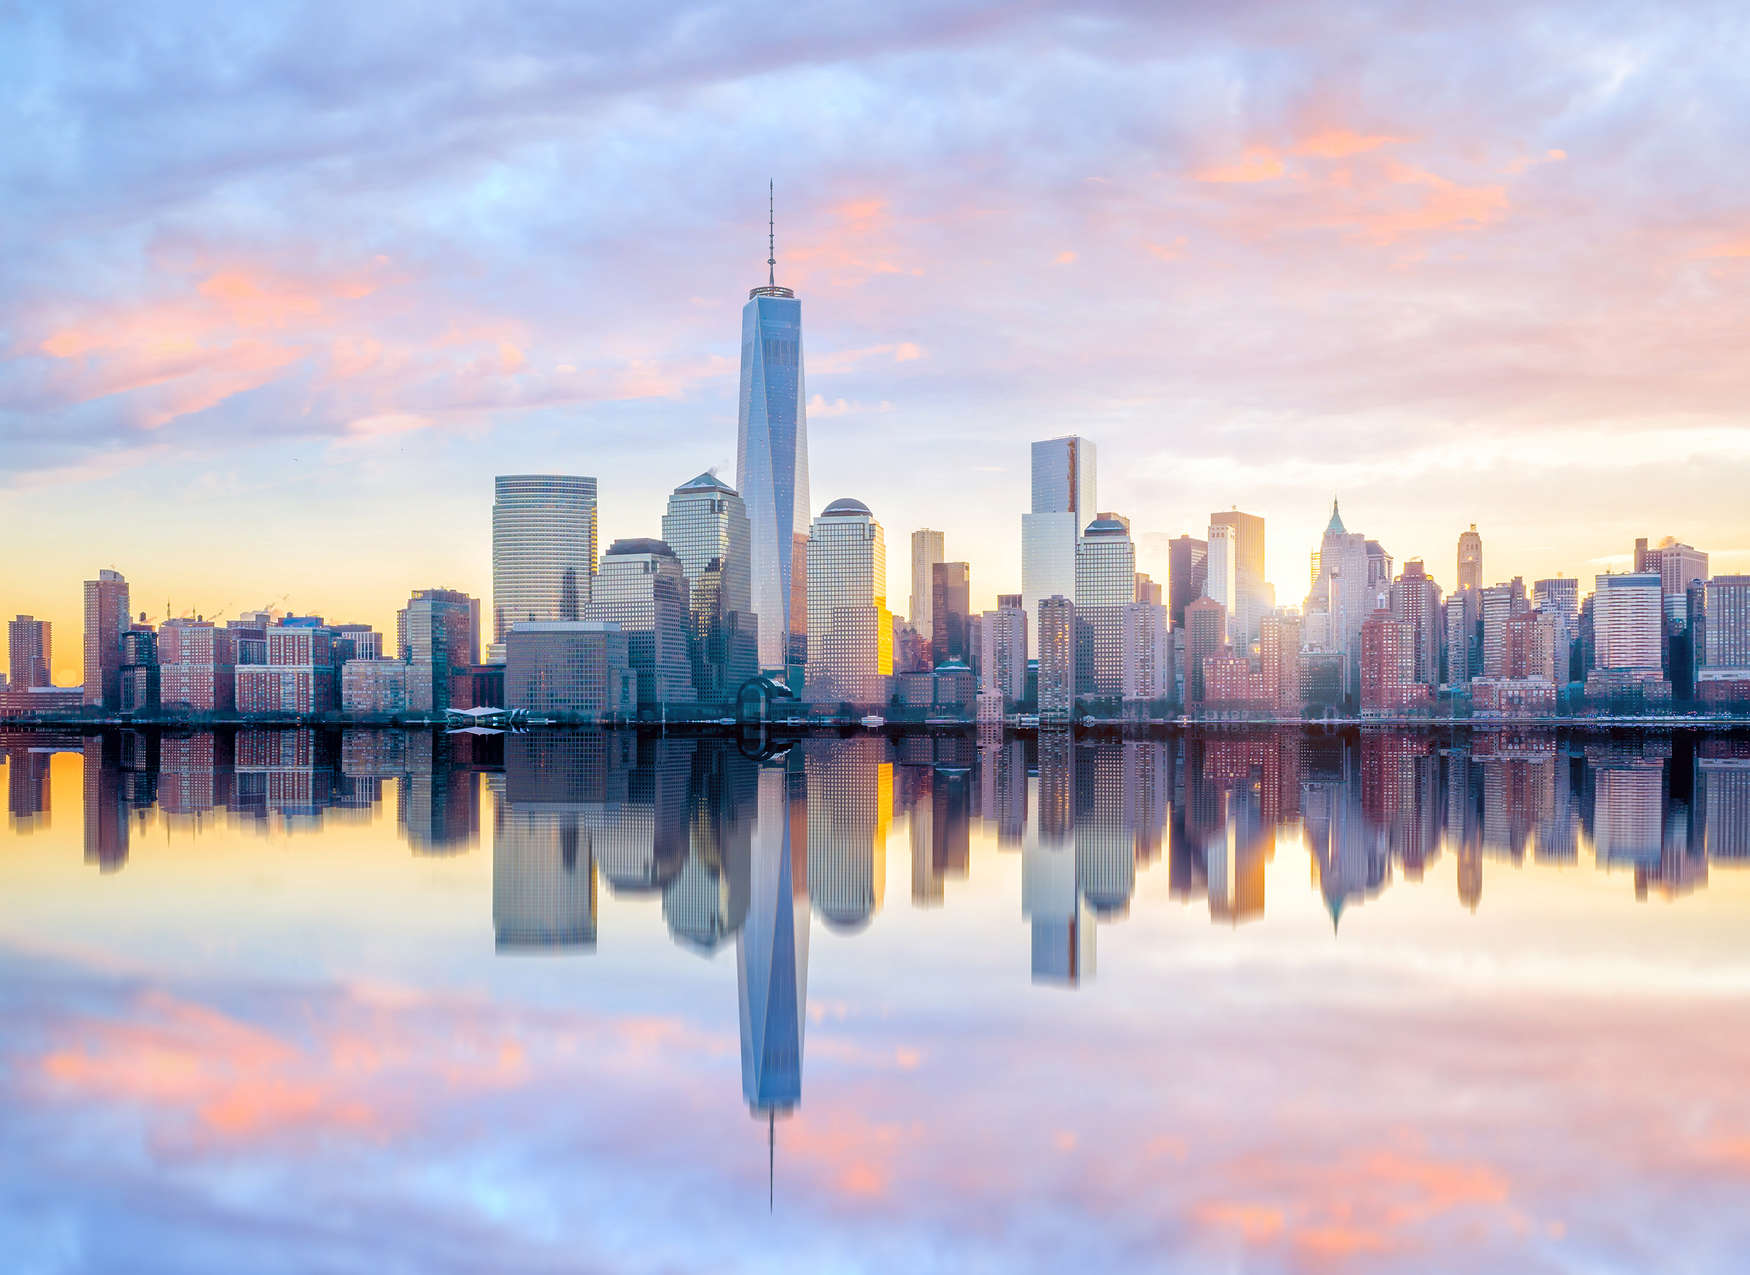             Photo wallpaper New York skyline in the morning - blue, grey, yellow
        